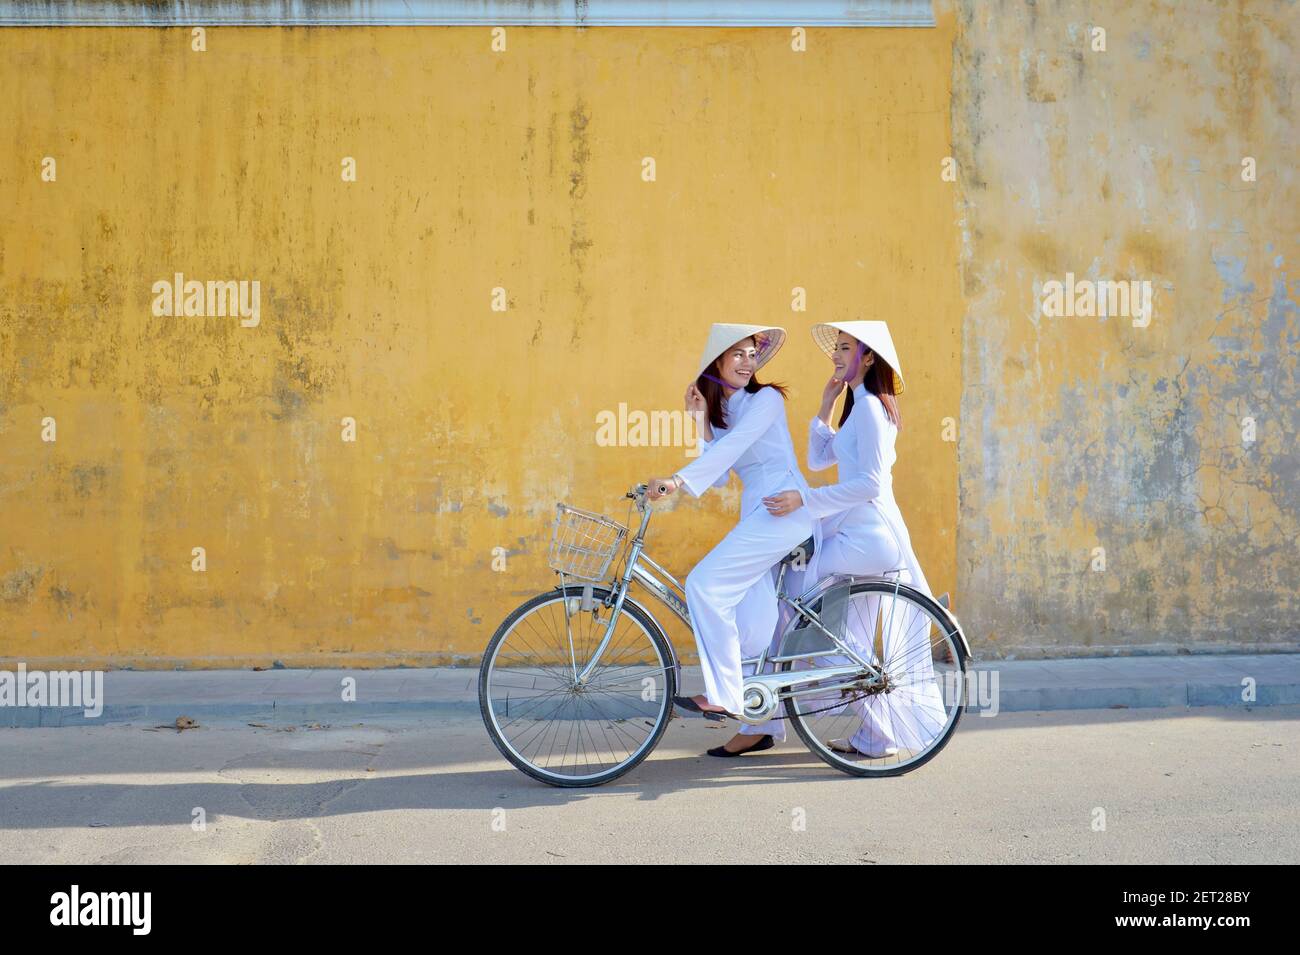 Two beautiful Asian women riding a bicycle in the city, Hoi An, Vietnam Stock Photo